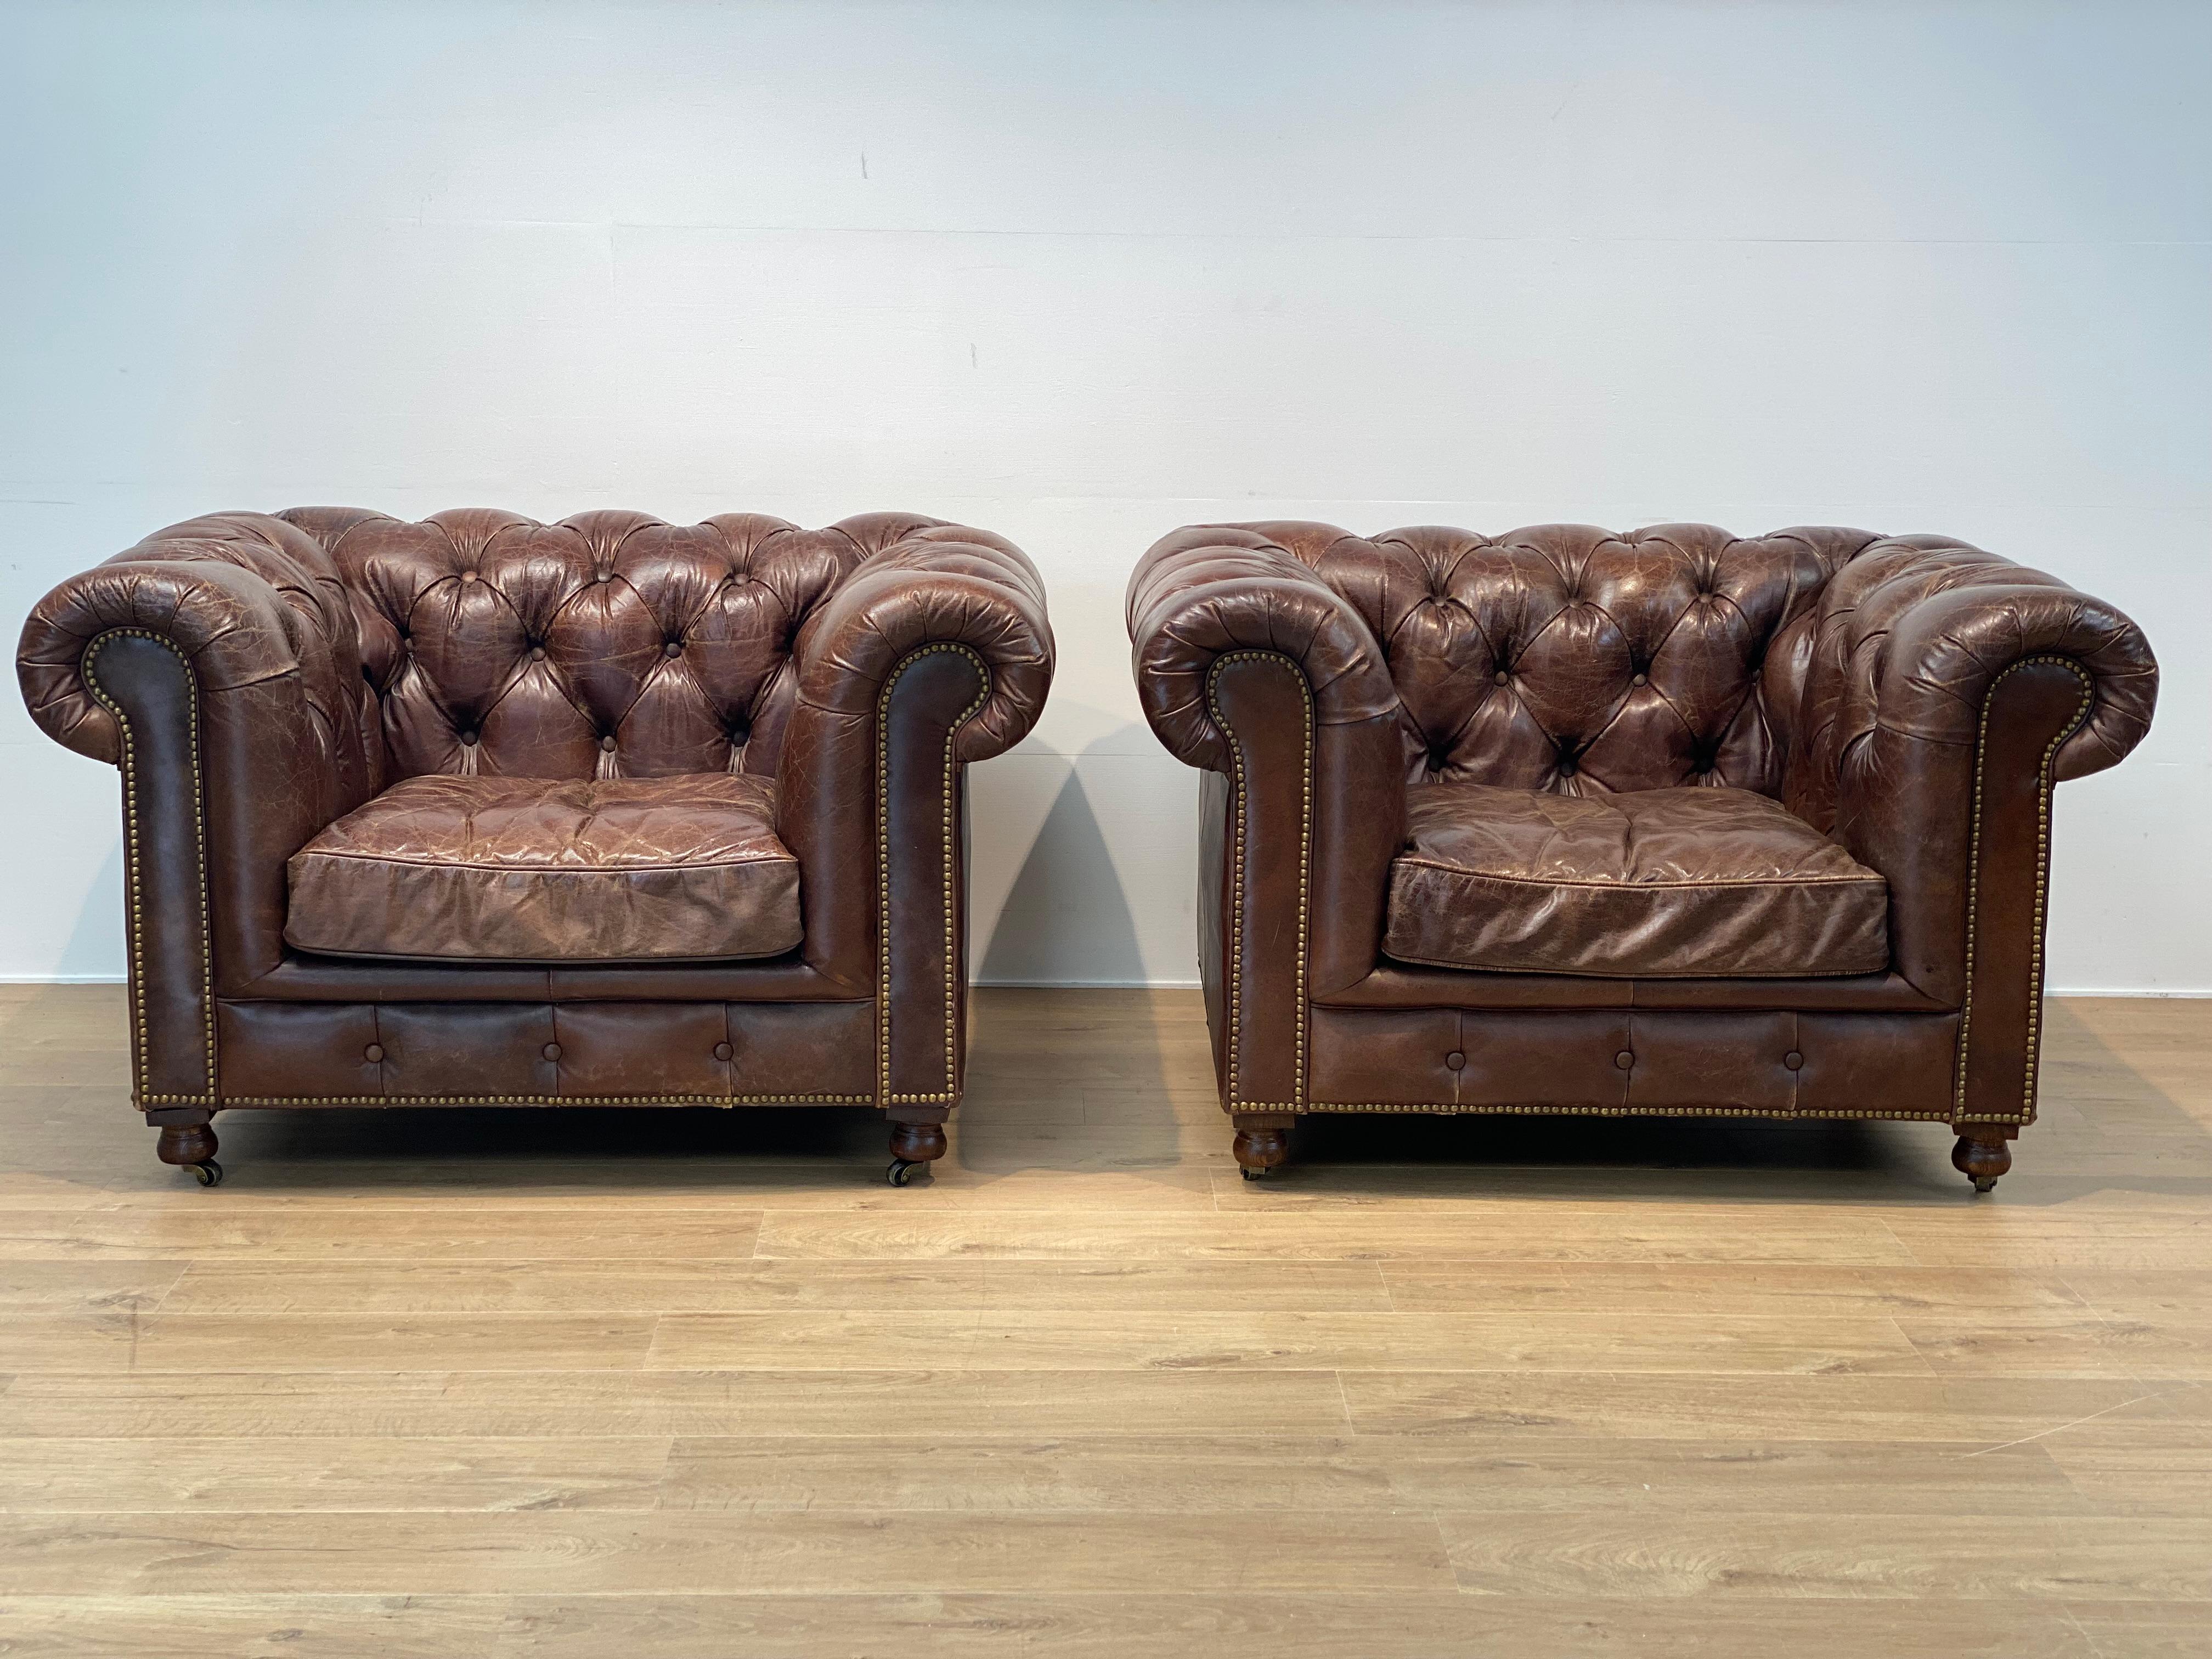 Pair of Leather Chesterfield Chairs In Good Condition For Sale In Schellebelle, BE